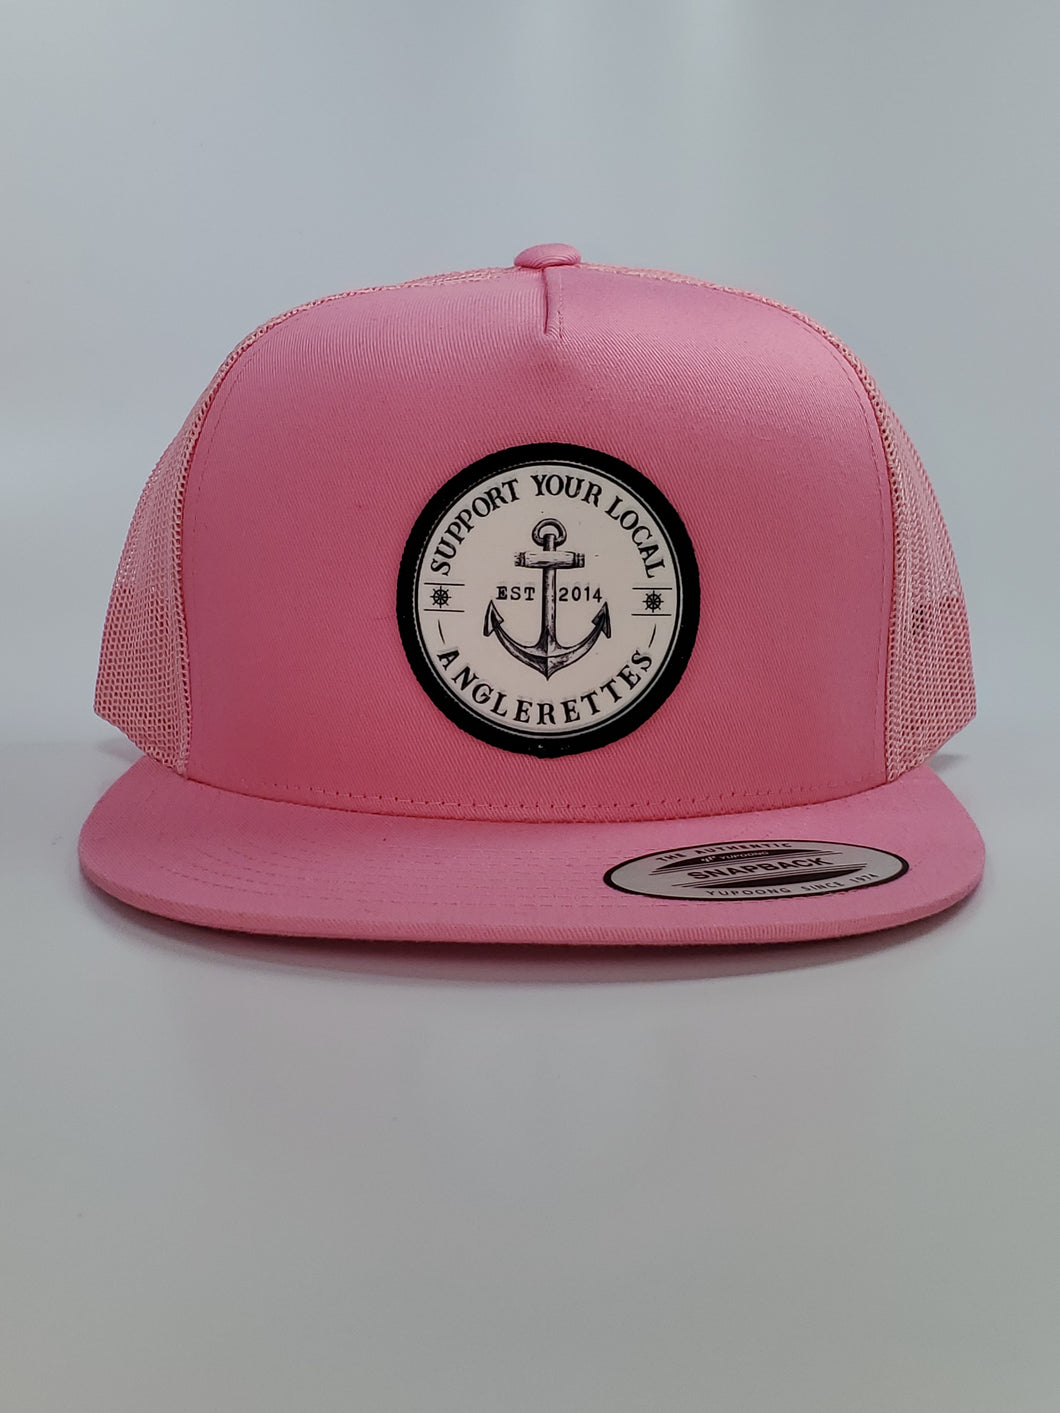 New!!! Support your Local Anglerettes Pink Flat Bill Hat